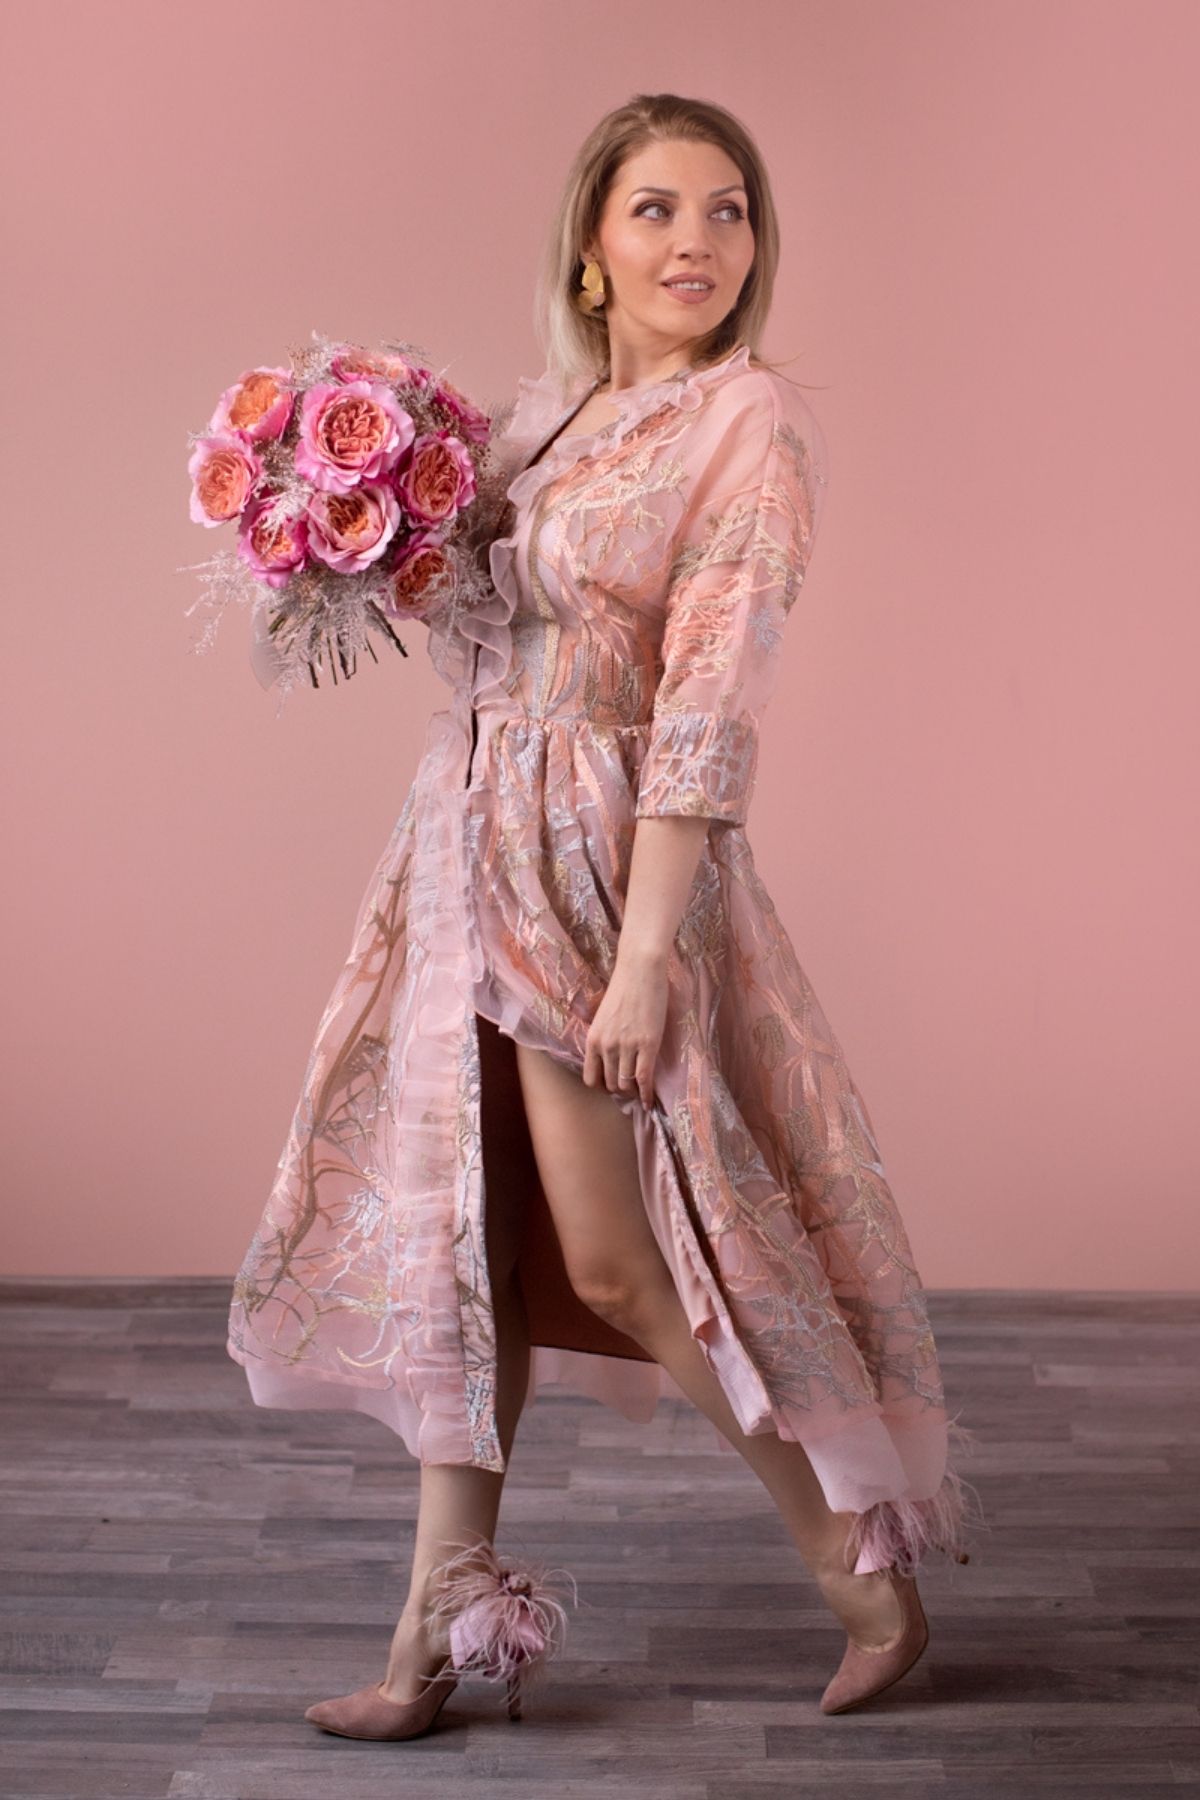 Yes! A Floral Interview With Alina Neacsa – Thursd.com Ambassador For 'Genuine Pink' - Article on Thursd